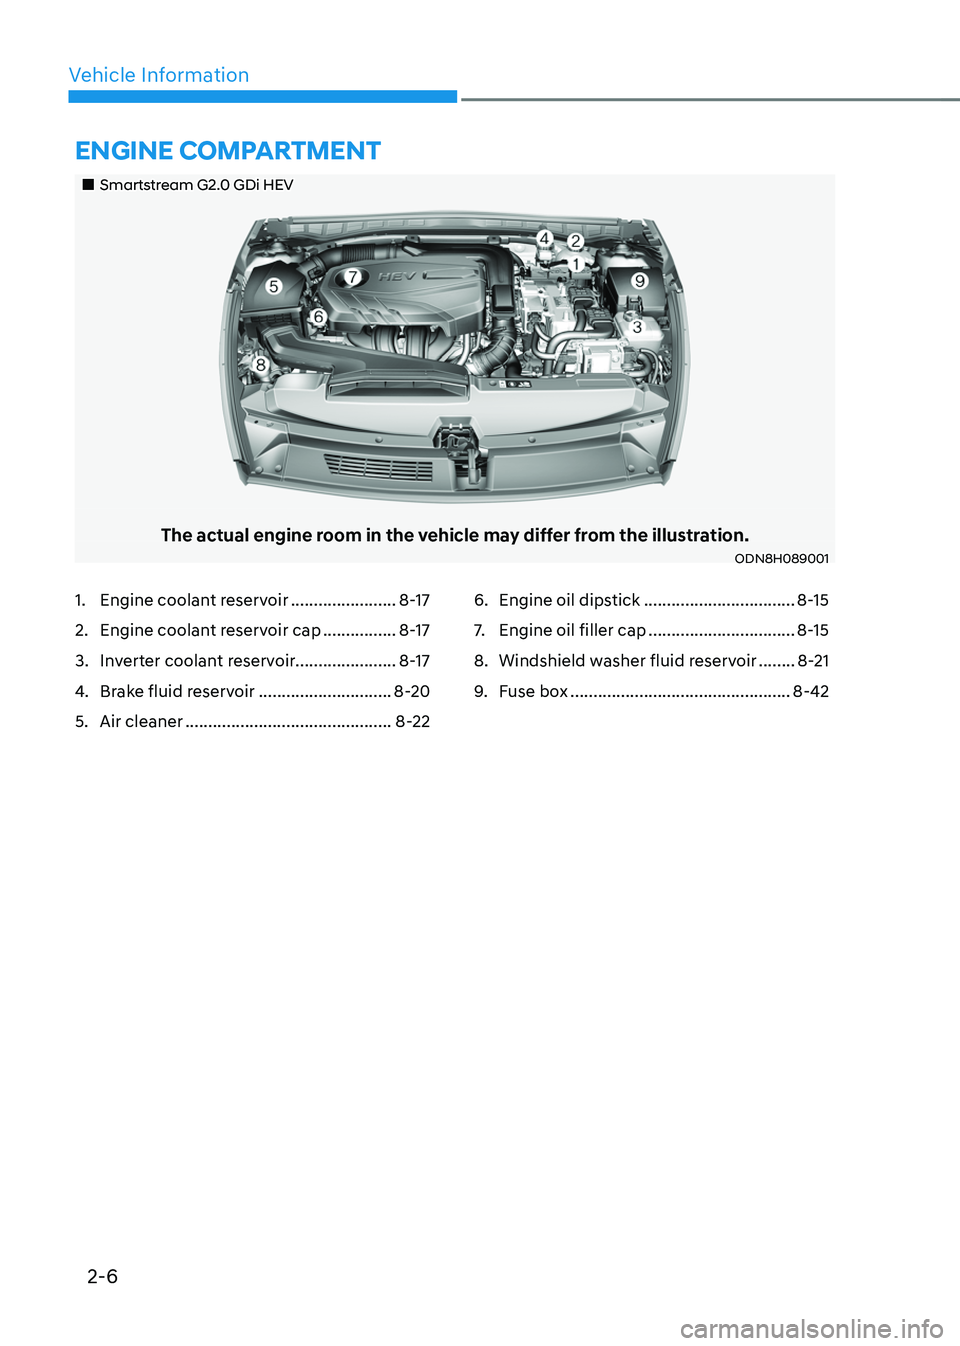 HYUNDAI SONATA HYBRID 2022 Owners Guide 2-6
Vehicle Information
„„Smartstream G2.0 GDi HEV
The actual engine room in the vehicle may differ from the illustration.ODN8H089001
ENGINE COMPARTMENT
1. Engine coolant reservoir .........